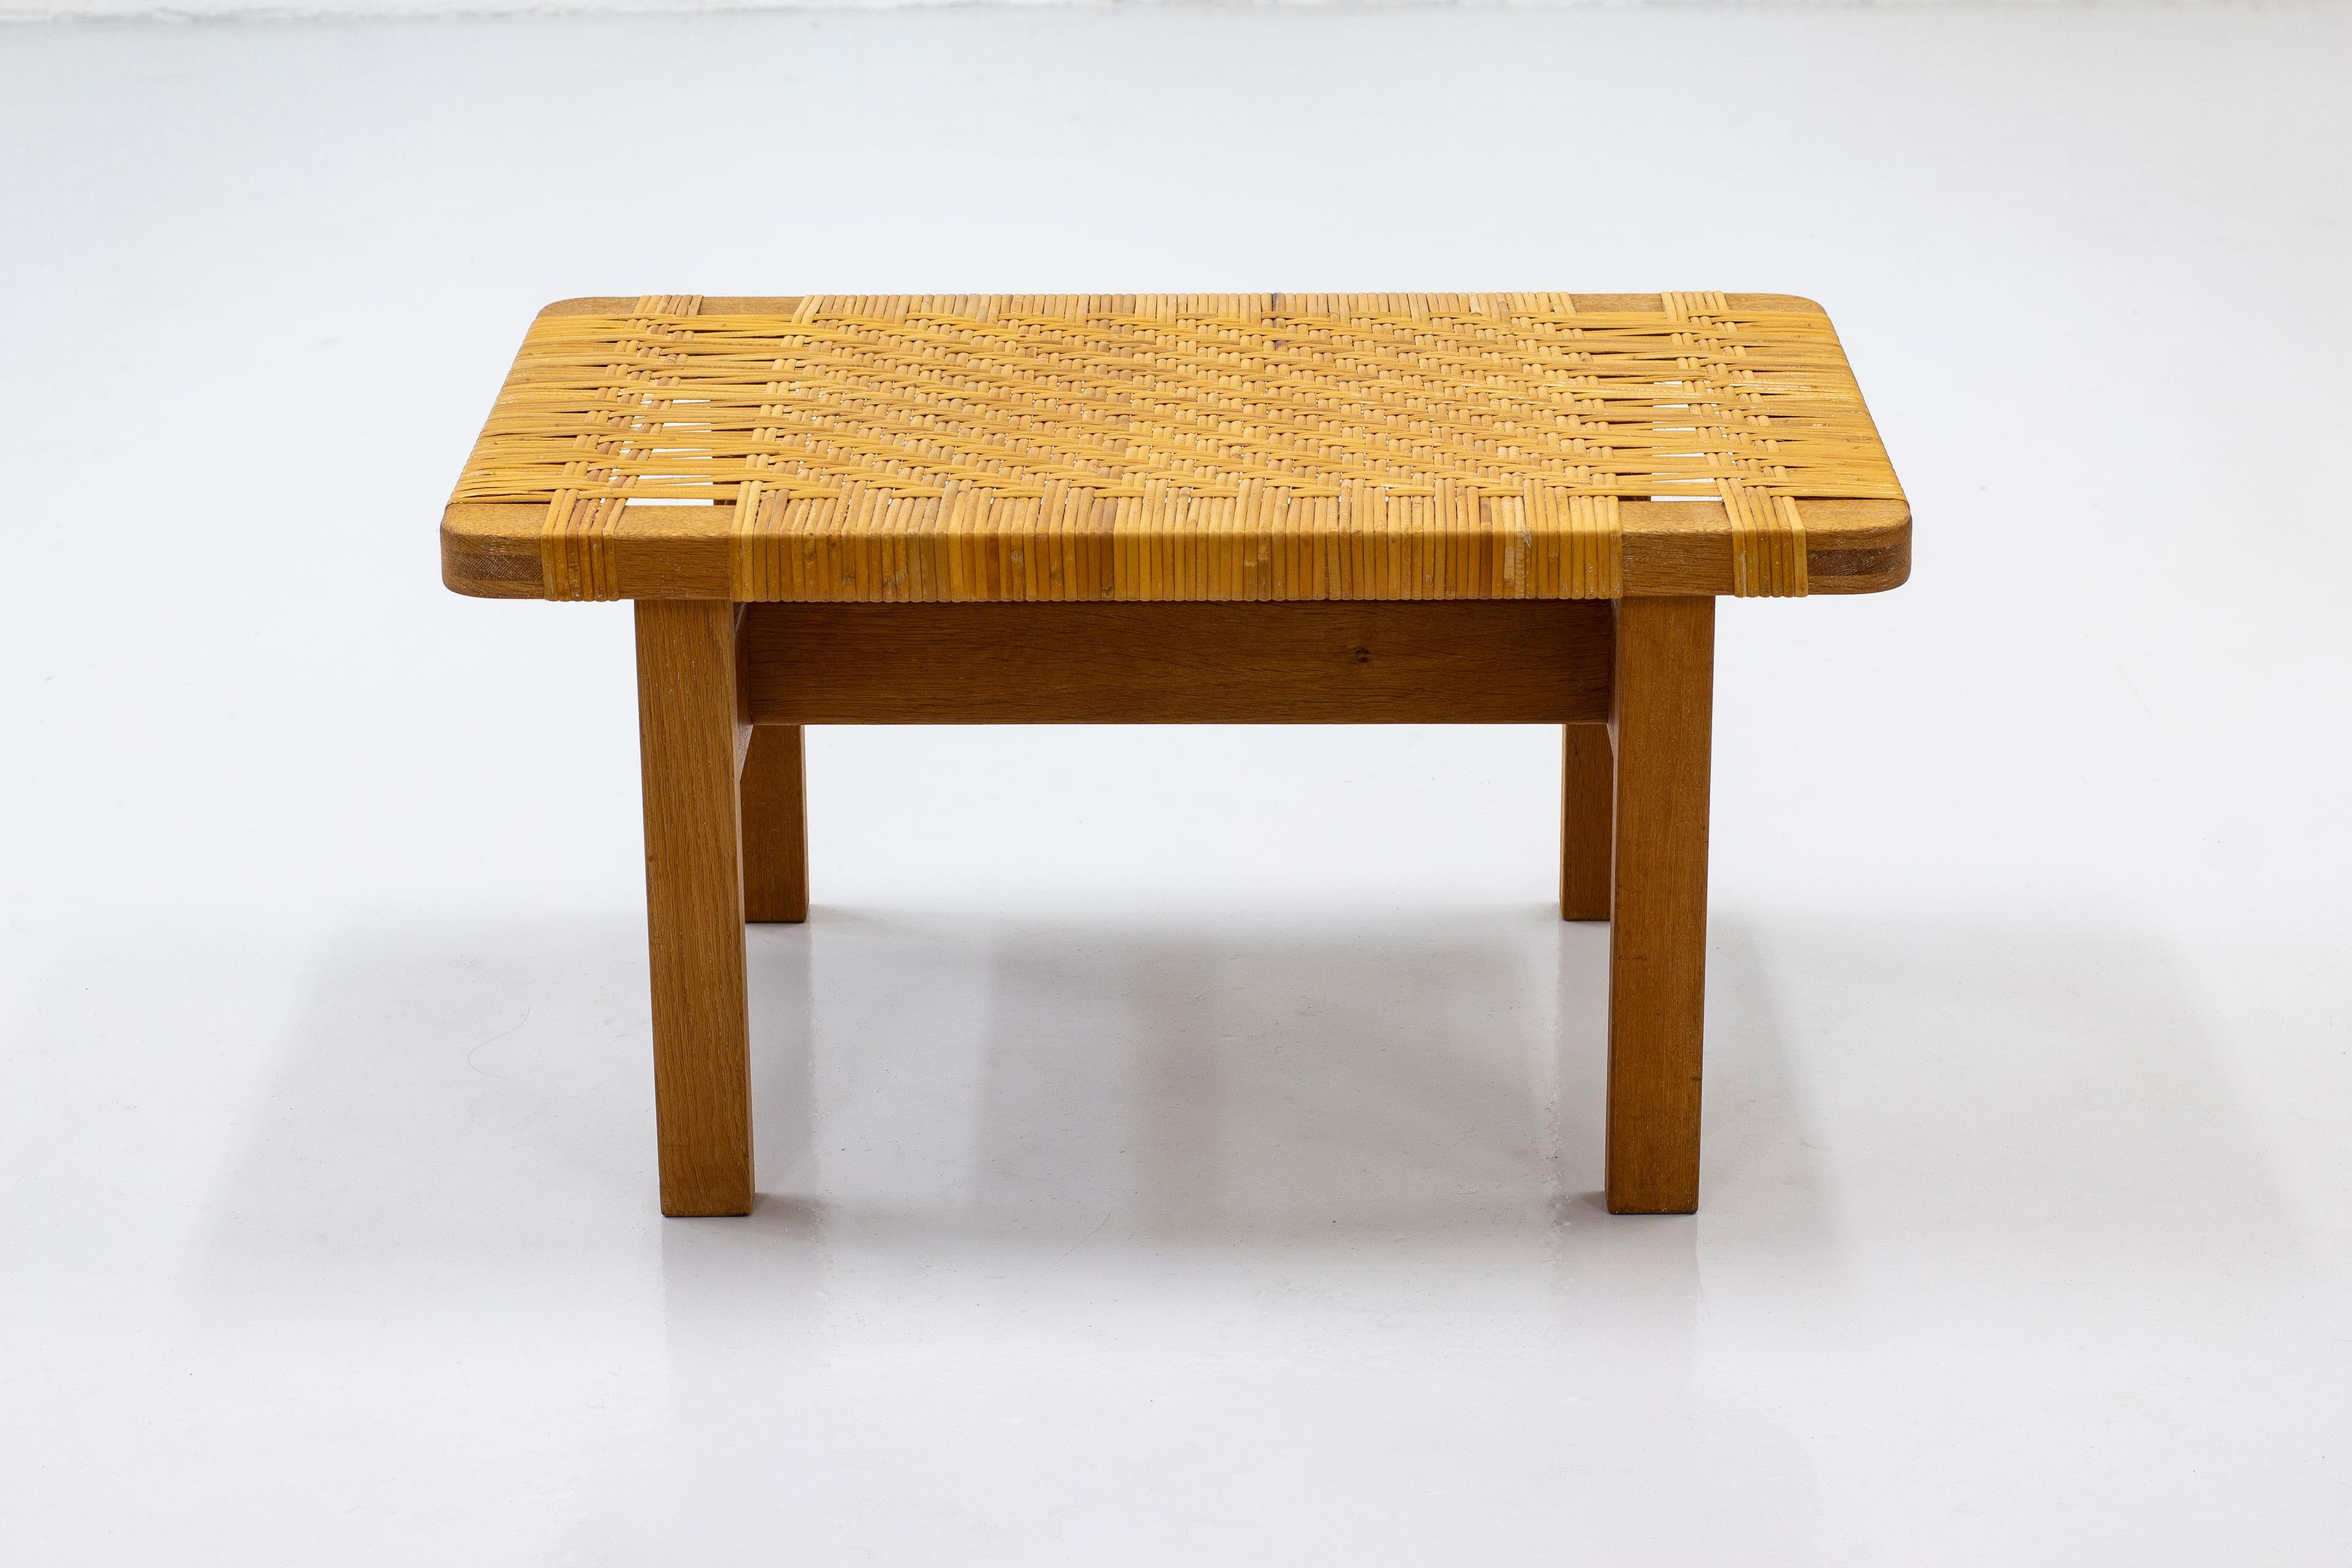 Scandinavian Modern Side Table in Oka and Cane by Børge Mogensen for Fredericia, Denmark, 1950s For Sale